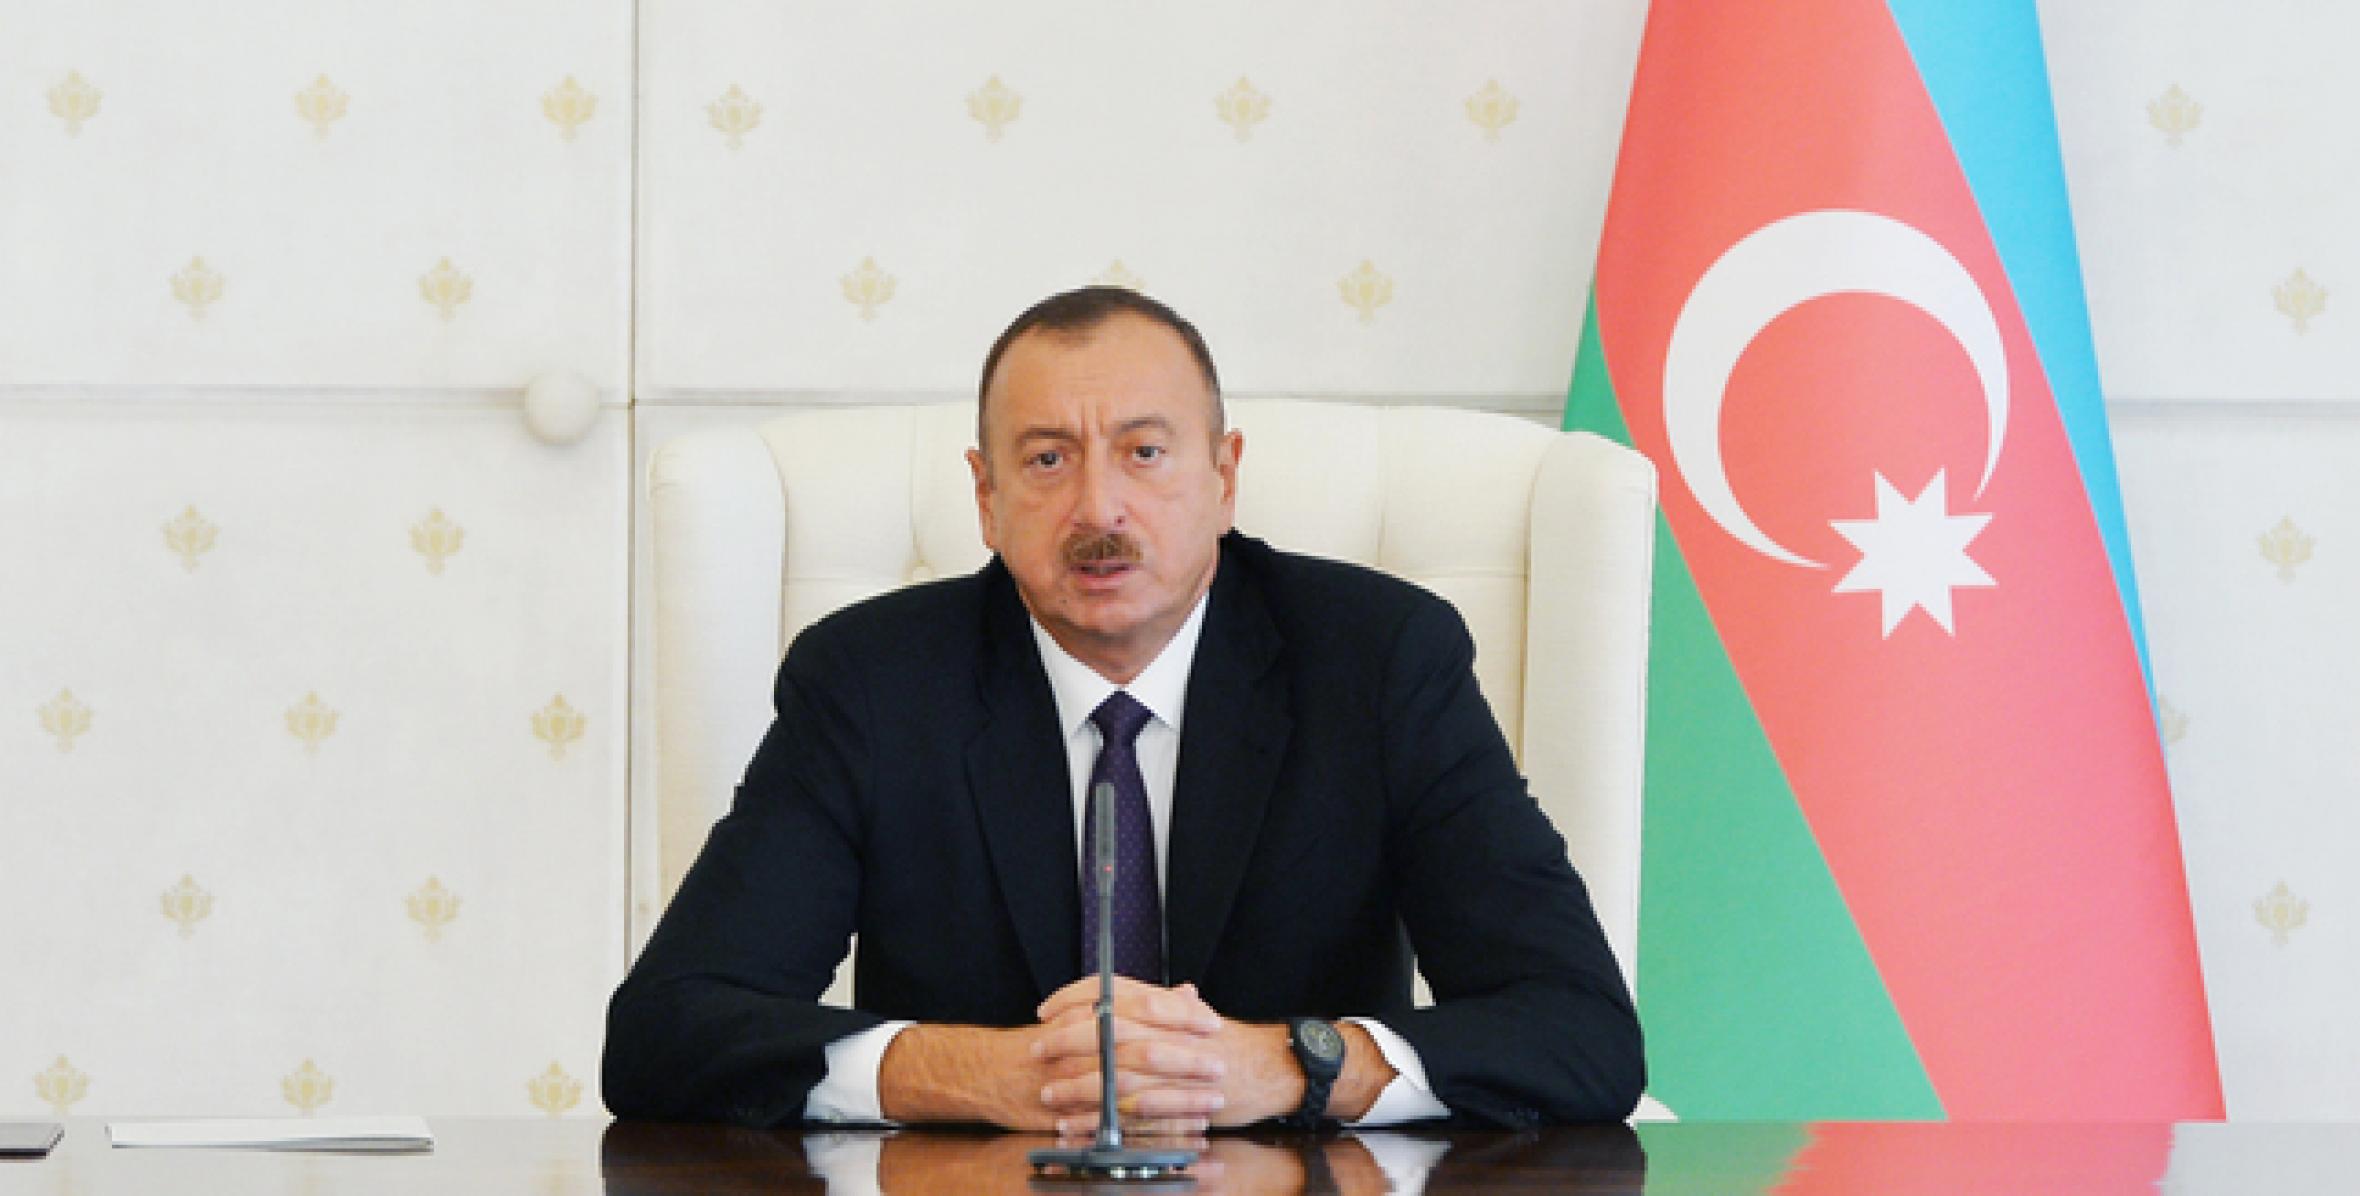 Closing speech by Ilham Aliyev at the at the first meeting of the Organizing Committee of the 4th Islamic Solidarity Games